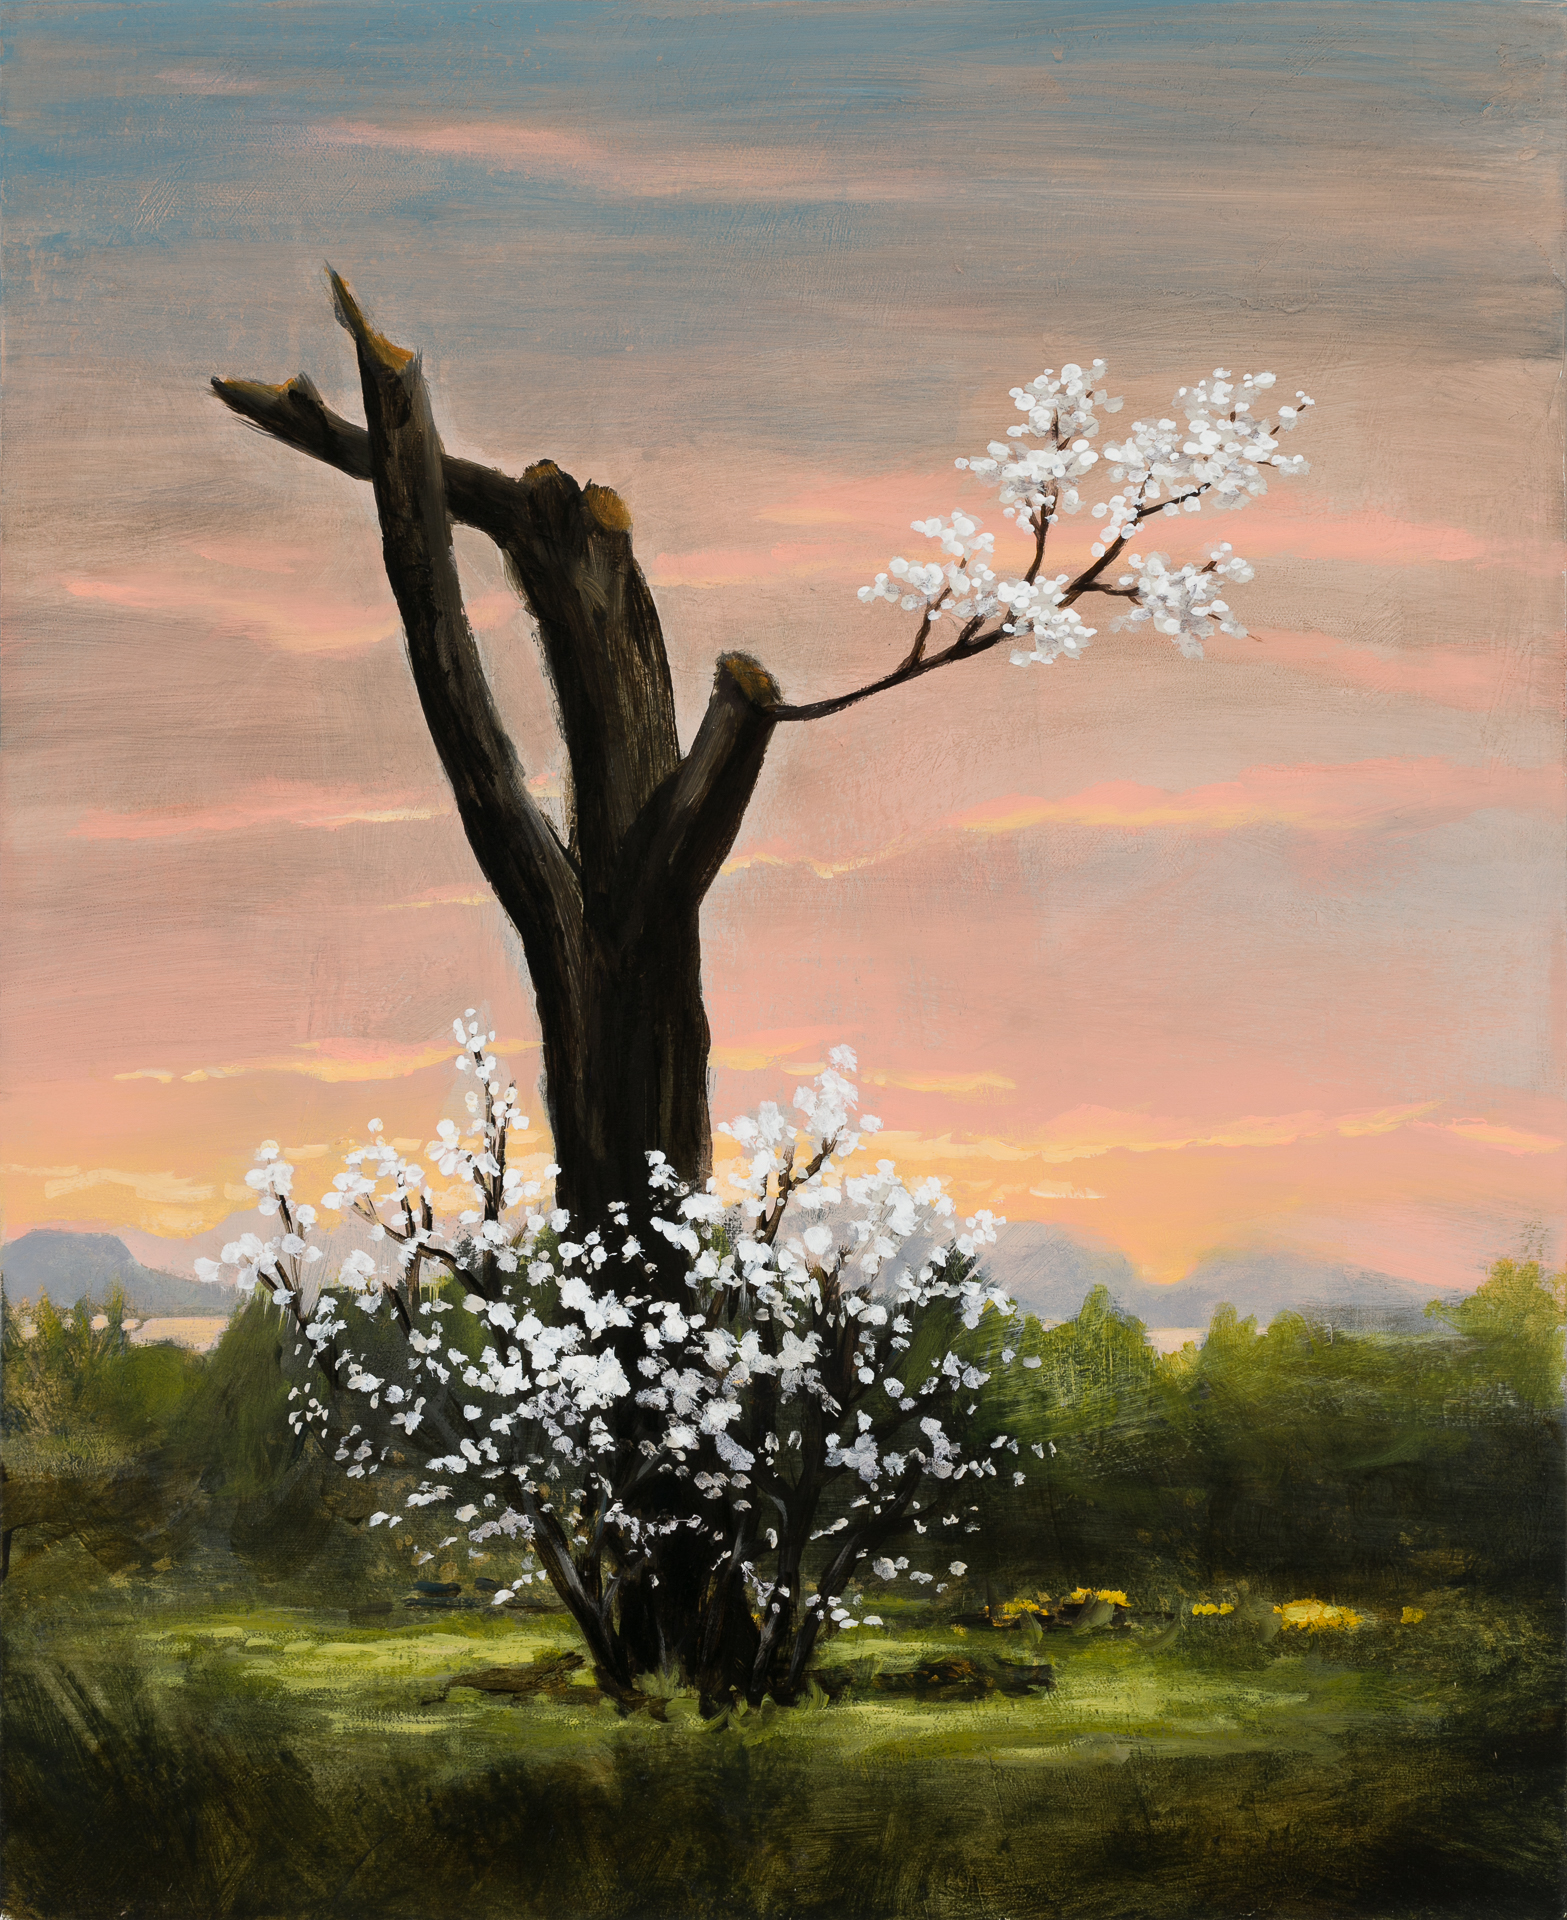 Robert's Apple Tree After the Storm, 24"x20"